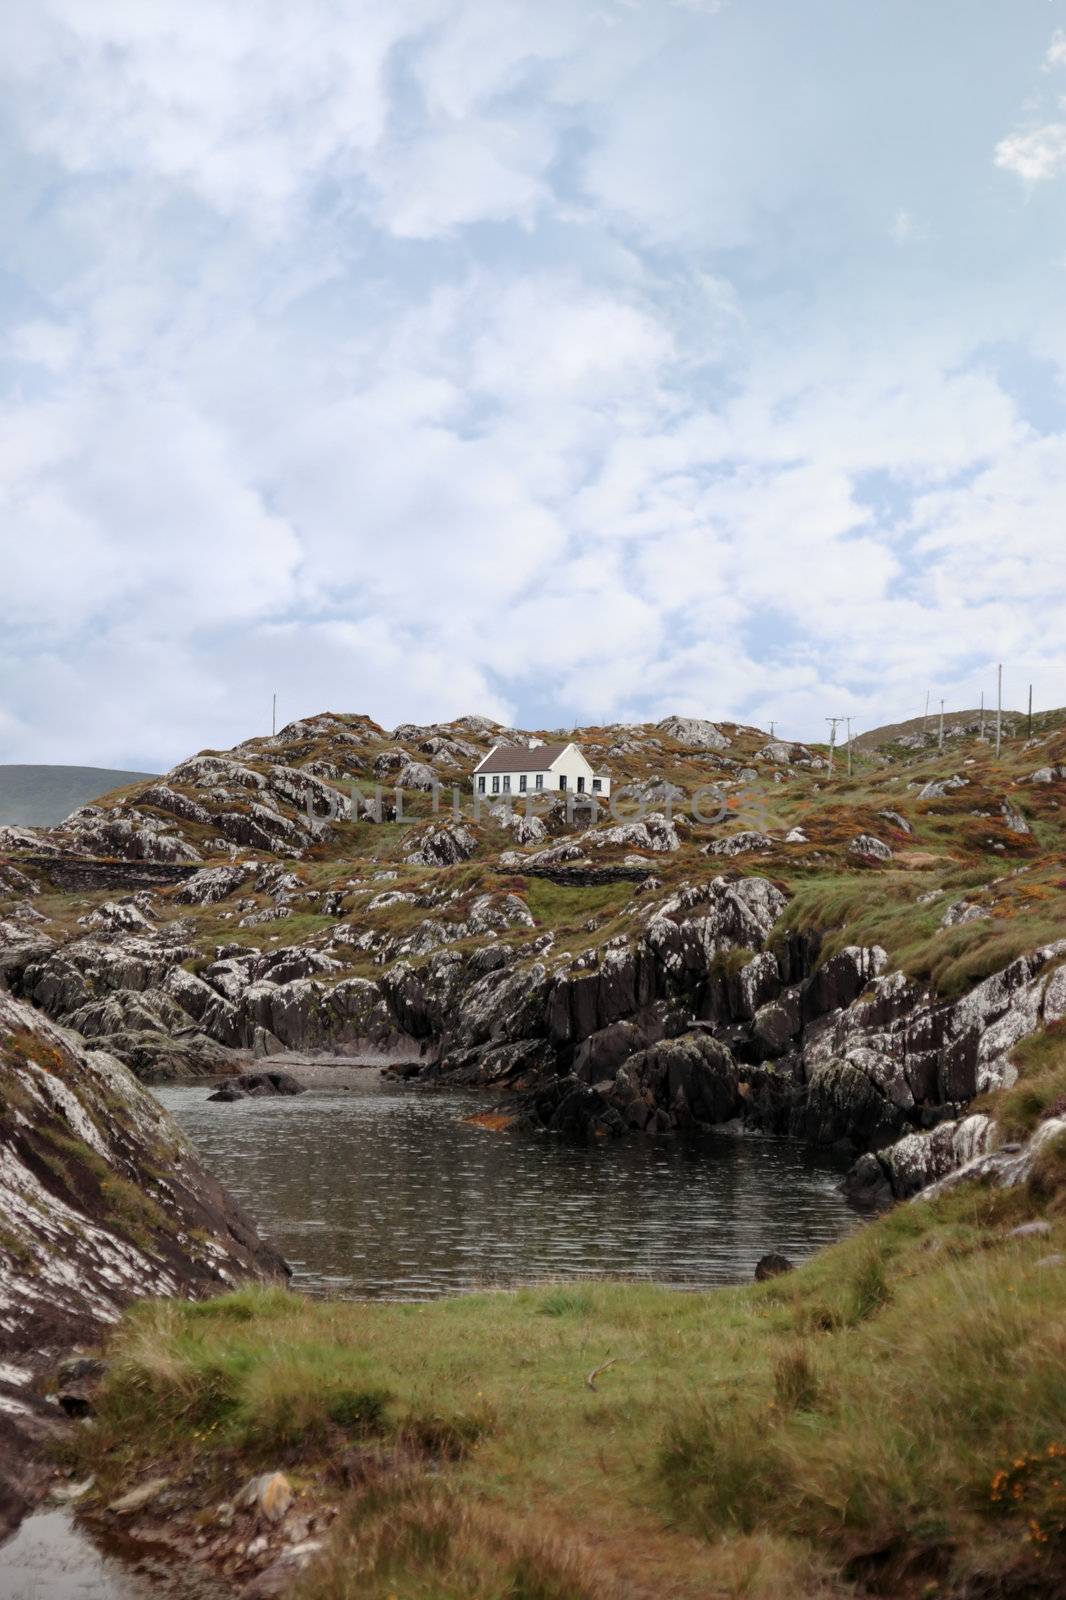 scenic view of a holiday home among the rocky lanscape in kerry ireland